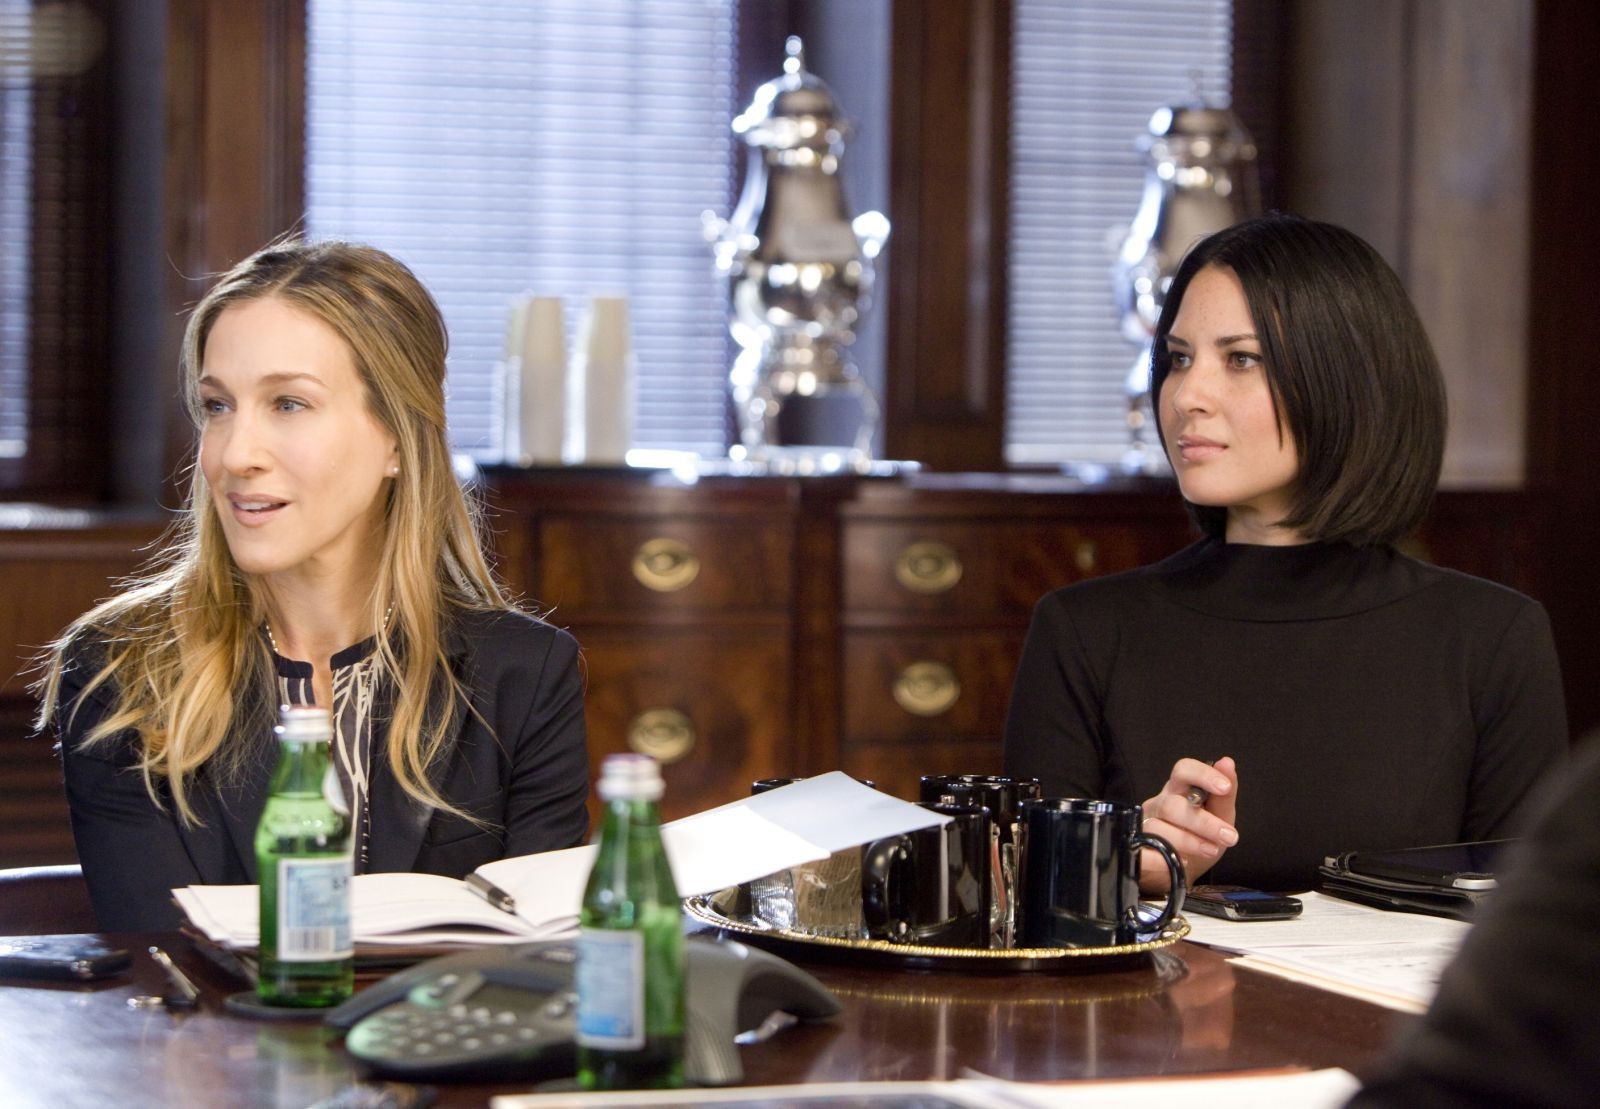 Sarah Jessica Parker stars as Kate Reddy and Olivia Munn stars as Momo in The Weinstein Company's I Don't Know How She Does It (2011). Photo credit by Craig Blankenhorn.